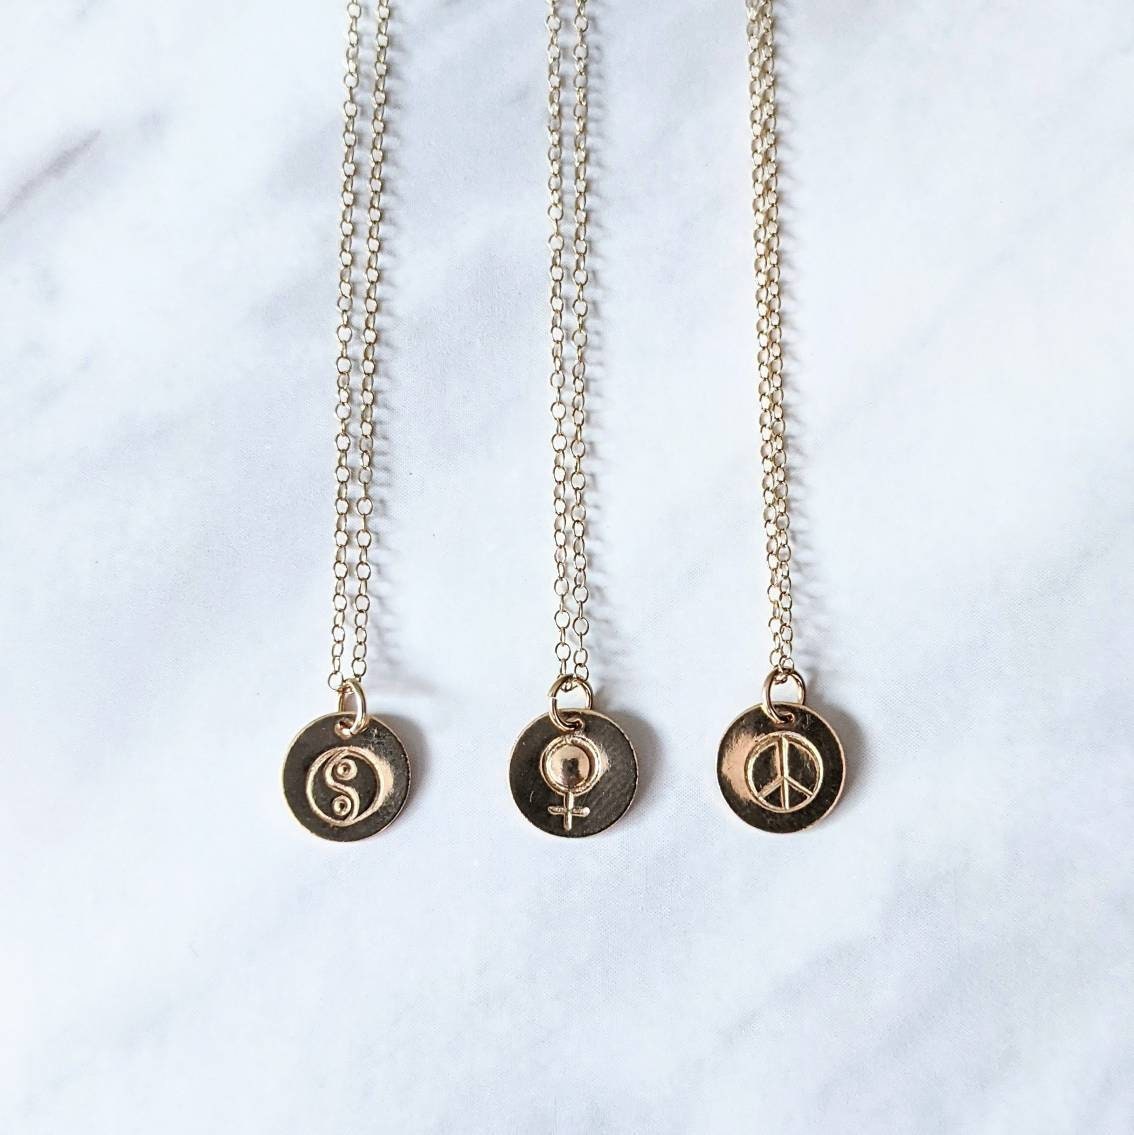 Gold Charm Necklaces